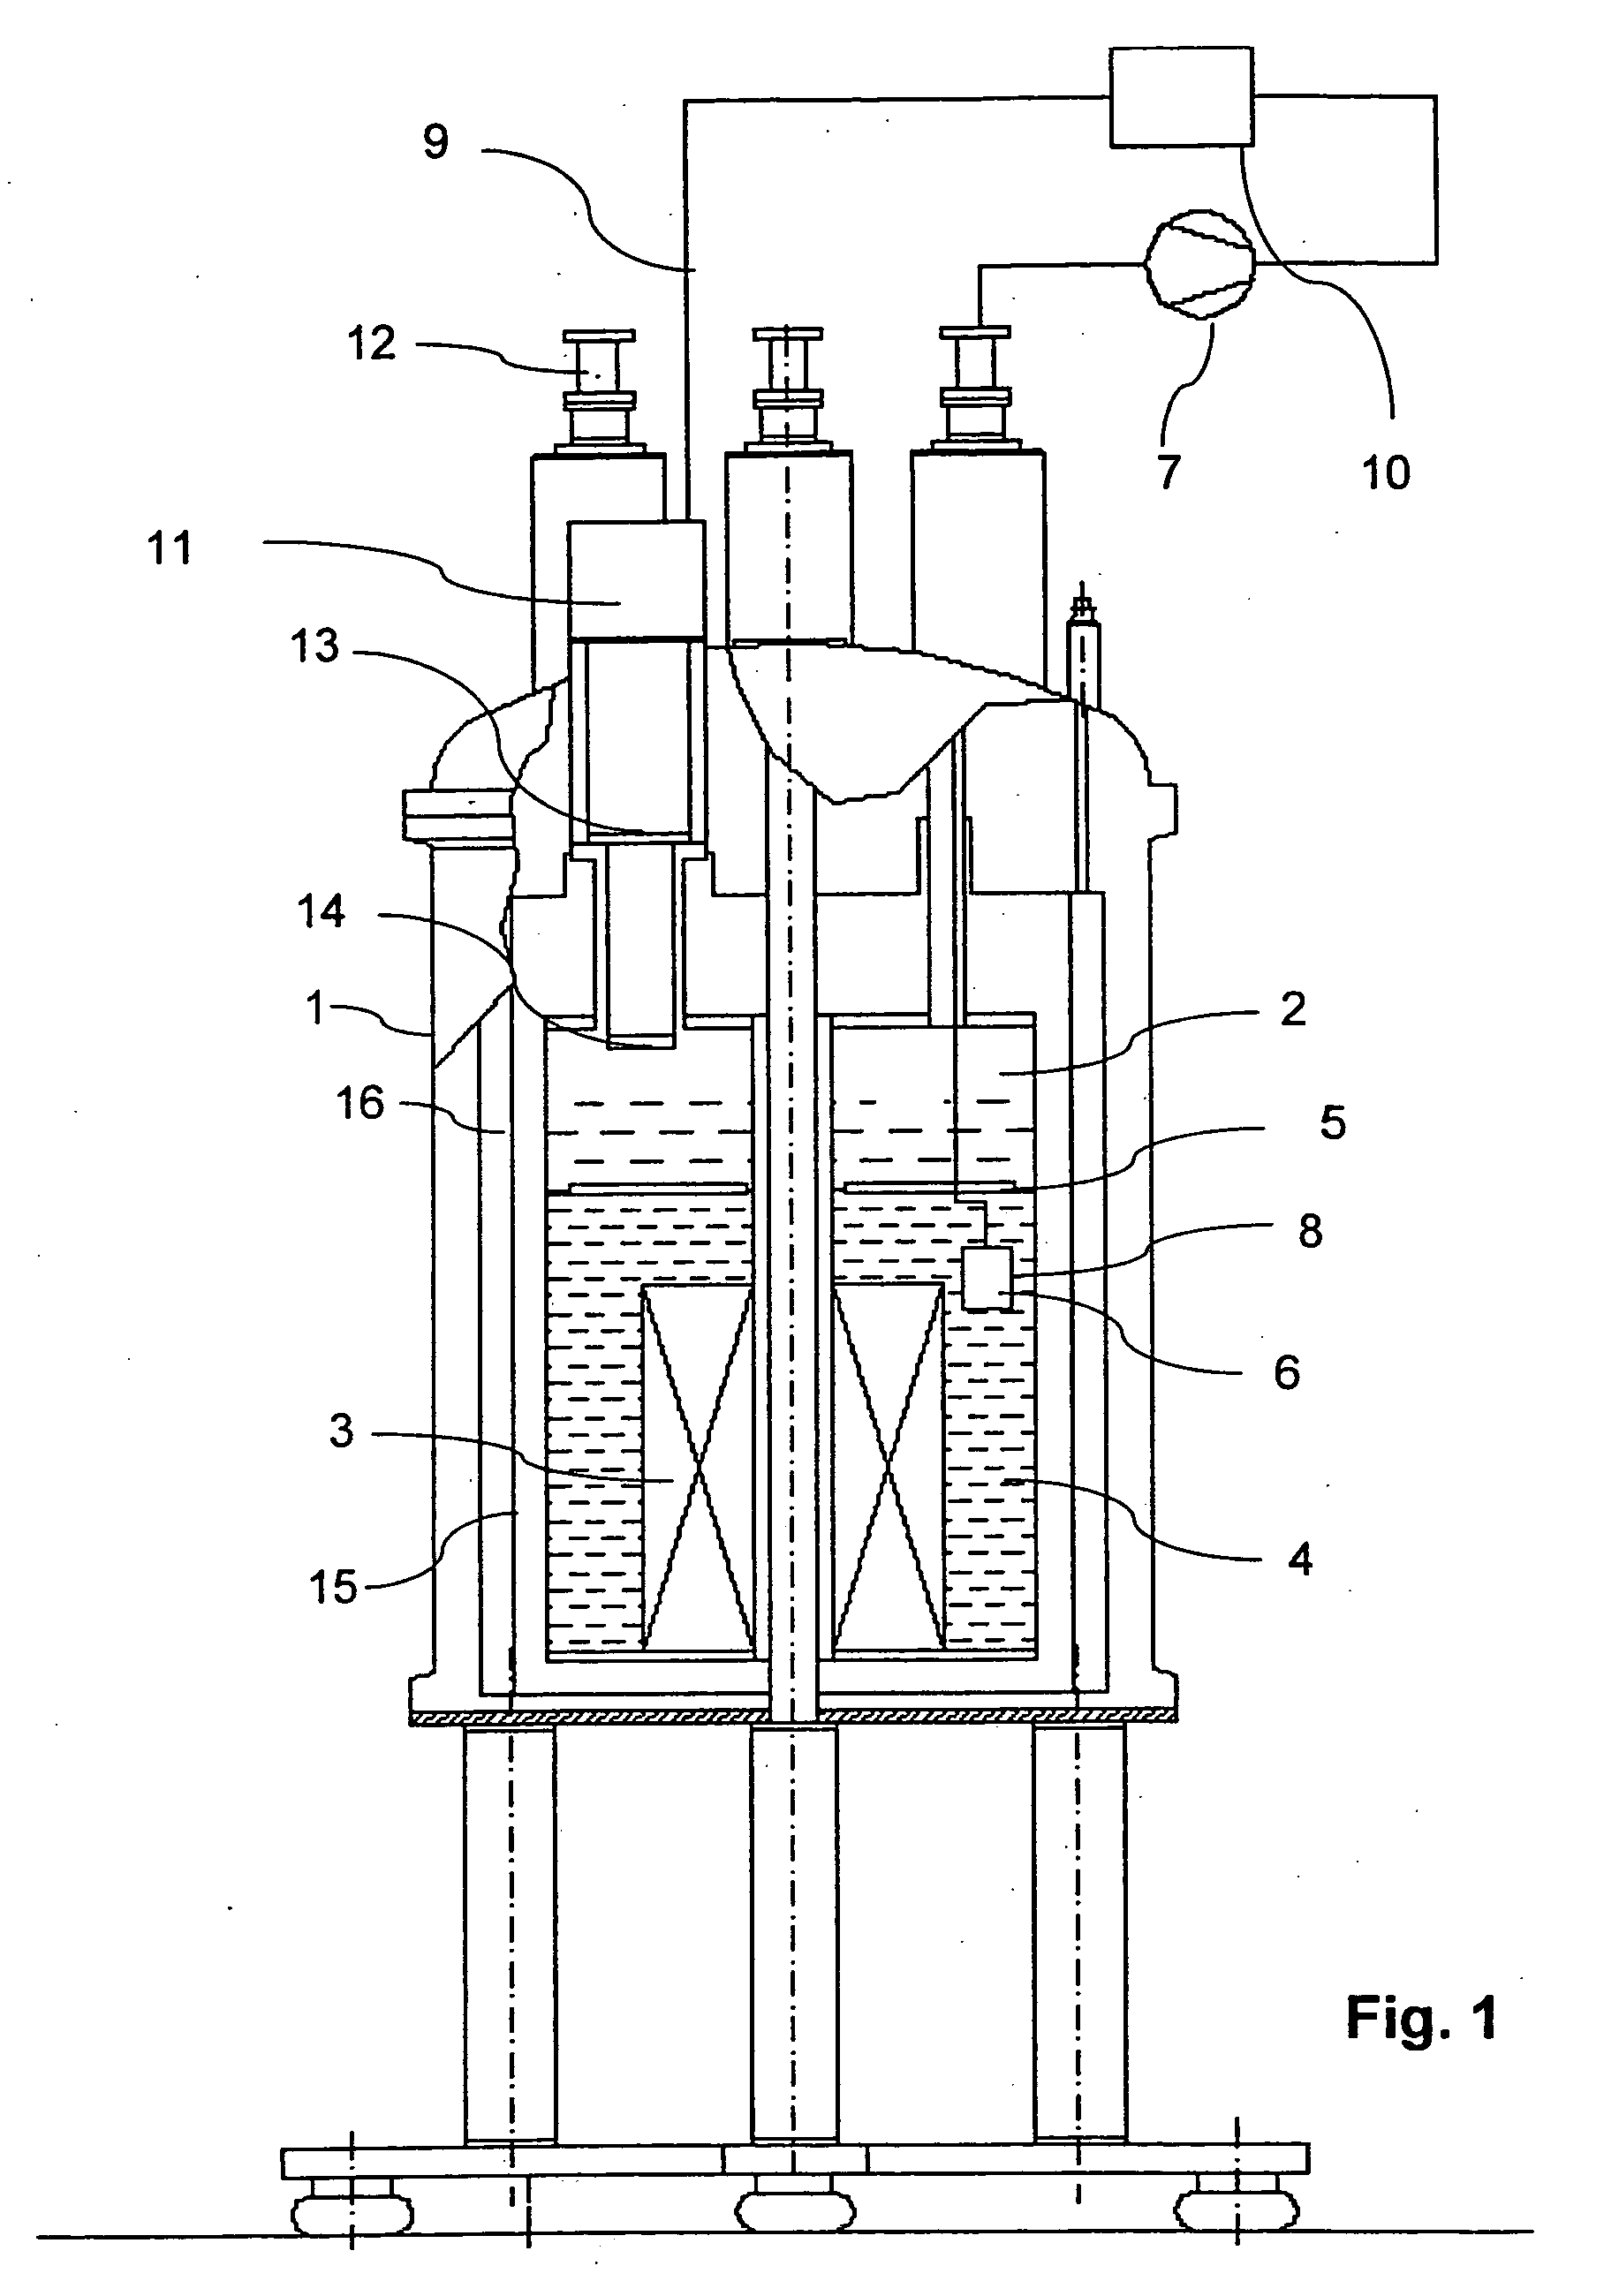 Superconducting magnet system with refrigerator